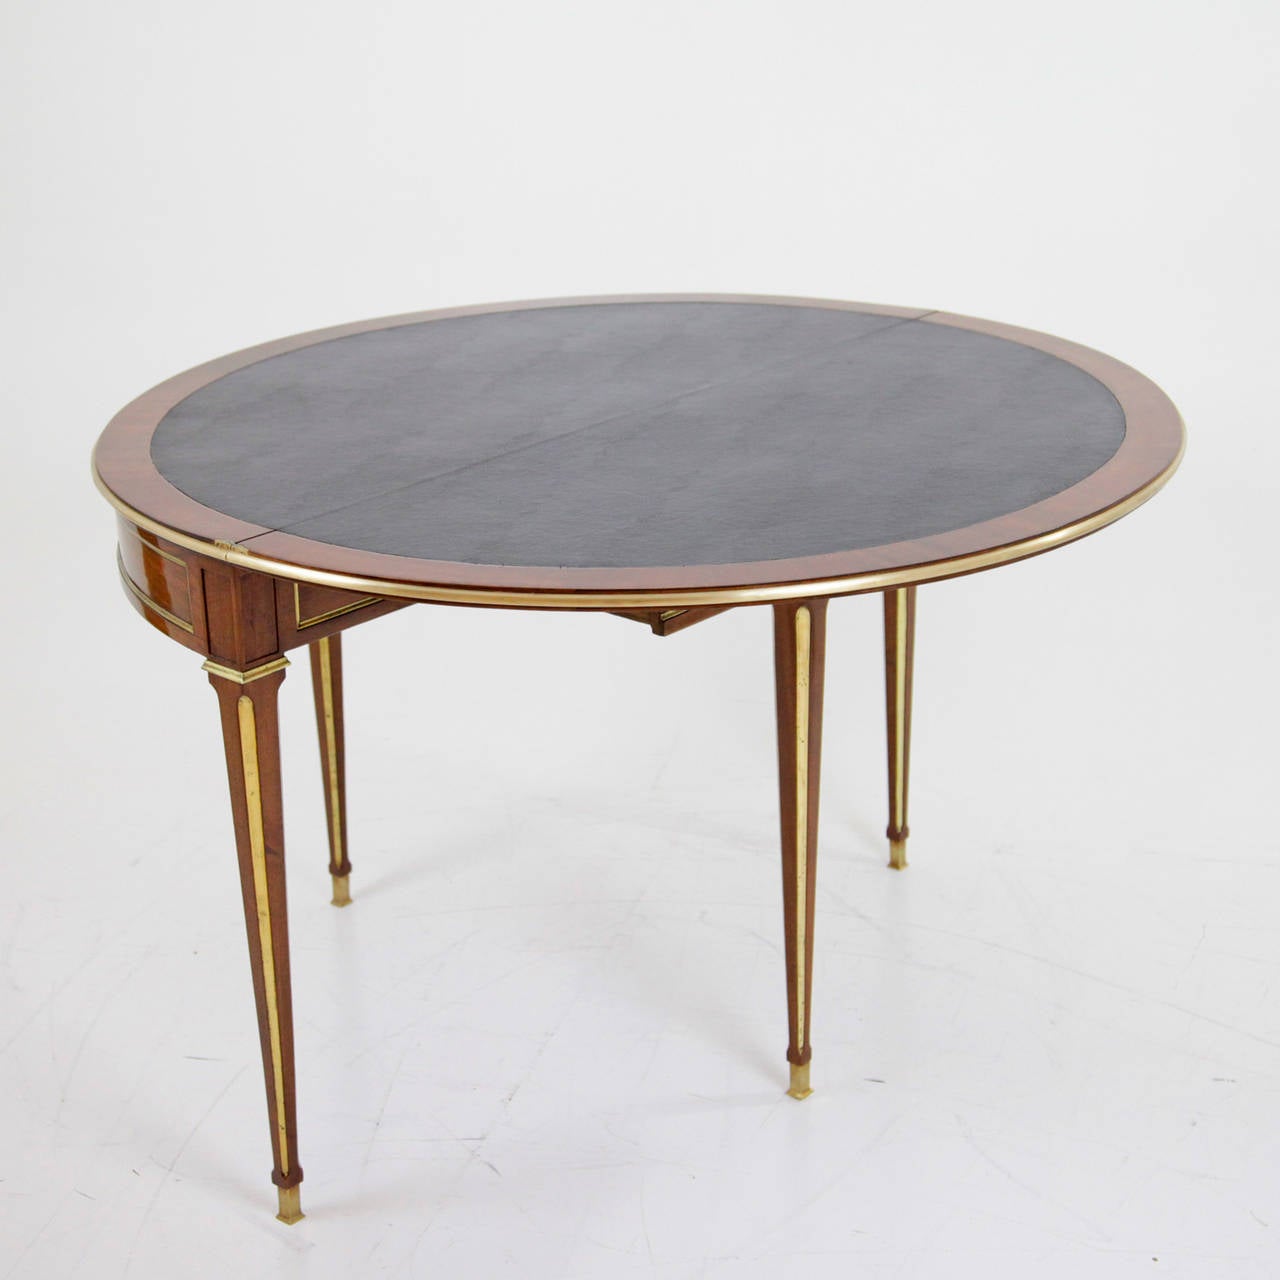 Veneer French Demilune Game Table, circa 1810